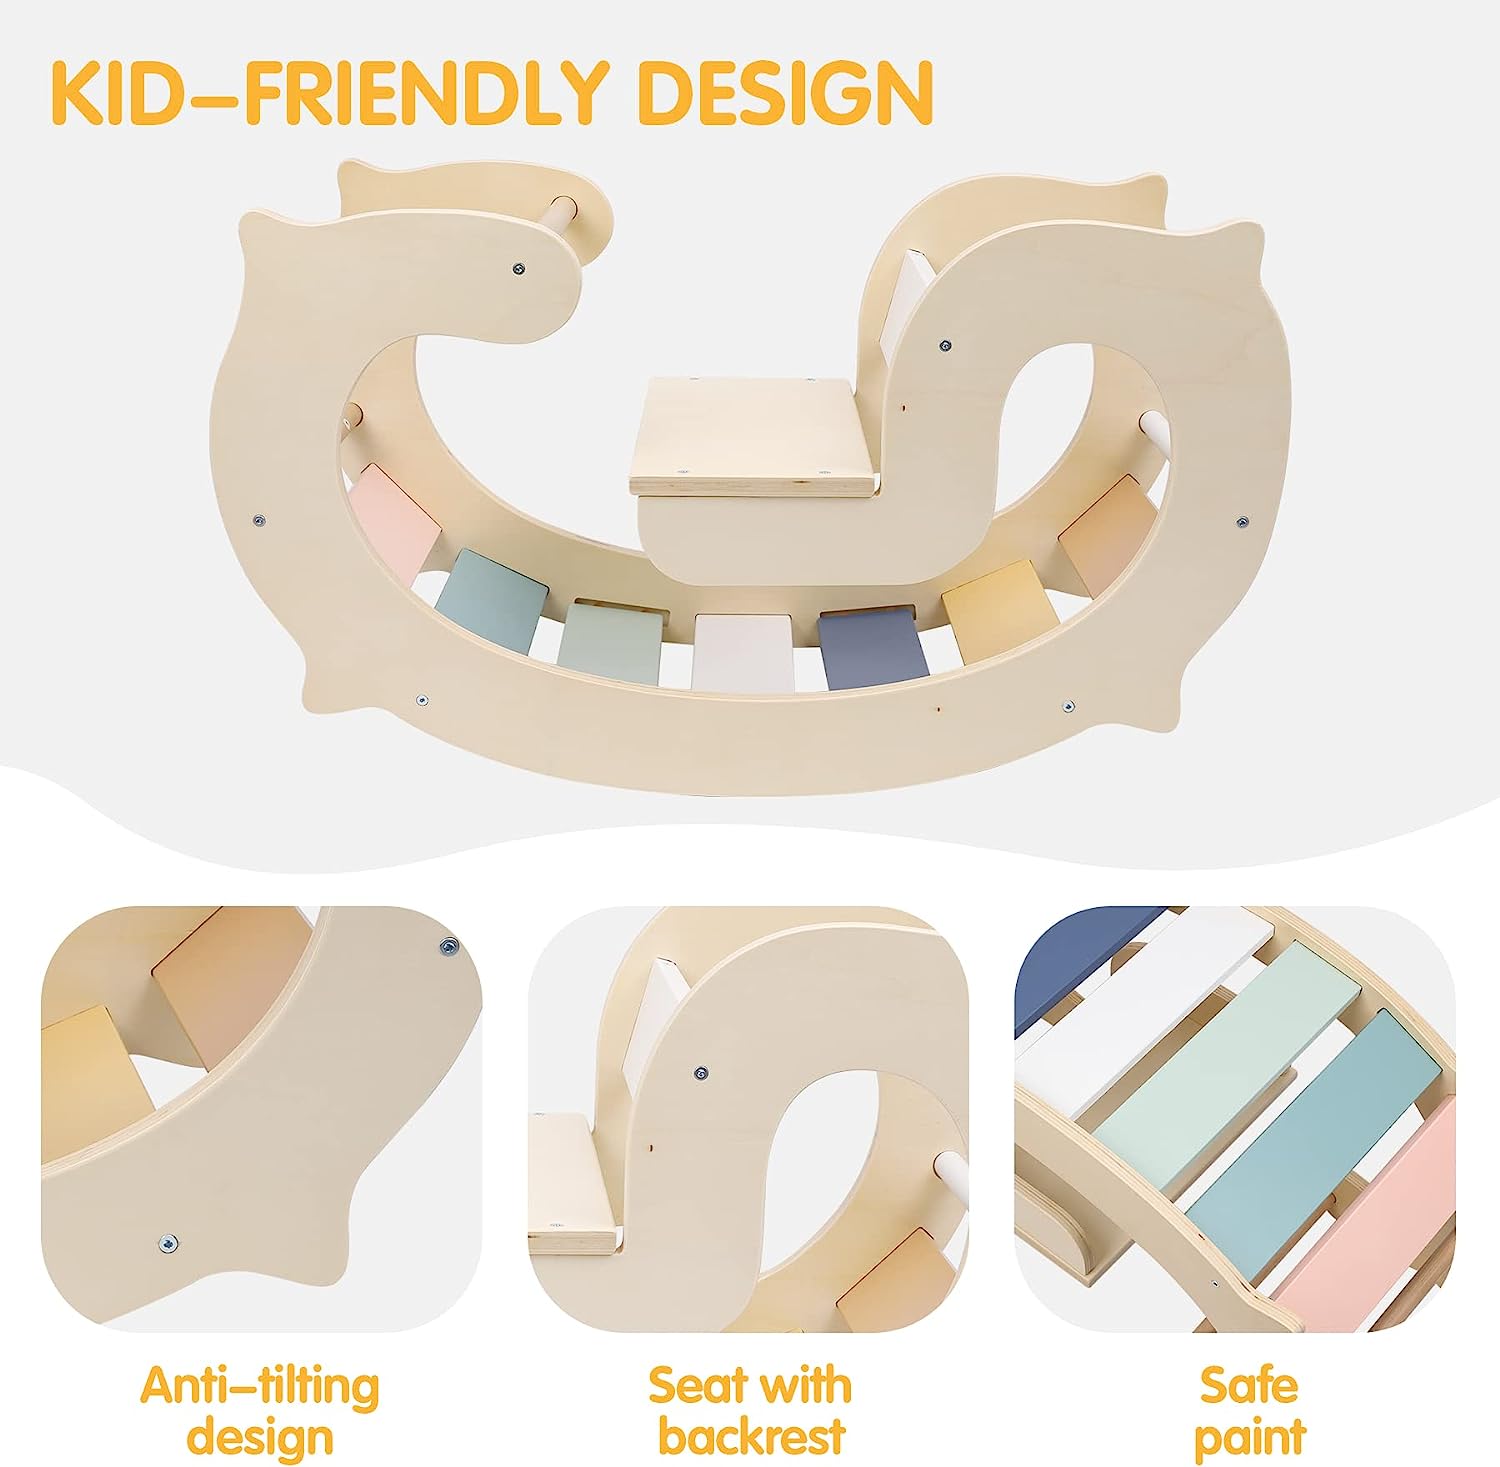 Labebe - Wood Rainbow Rocker Chair for Toddlers